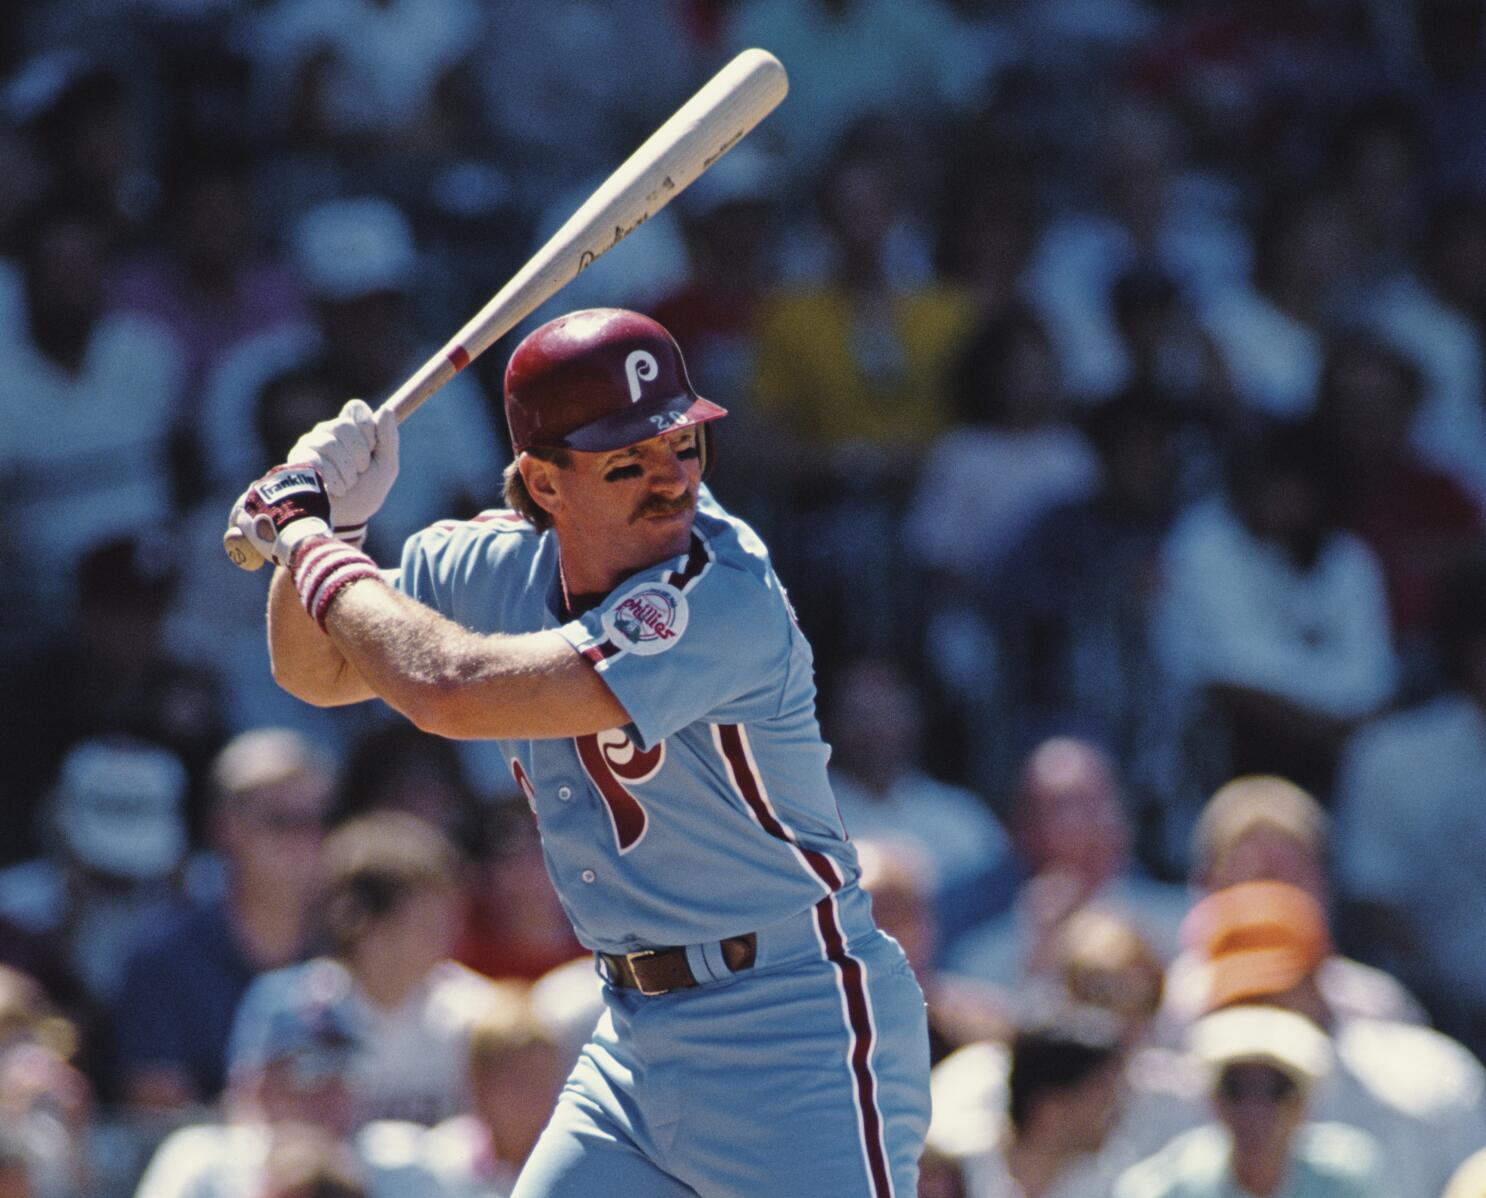 If Dave Kingman reached 500 home runs, would he be in the Baseball